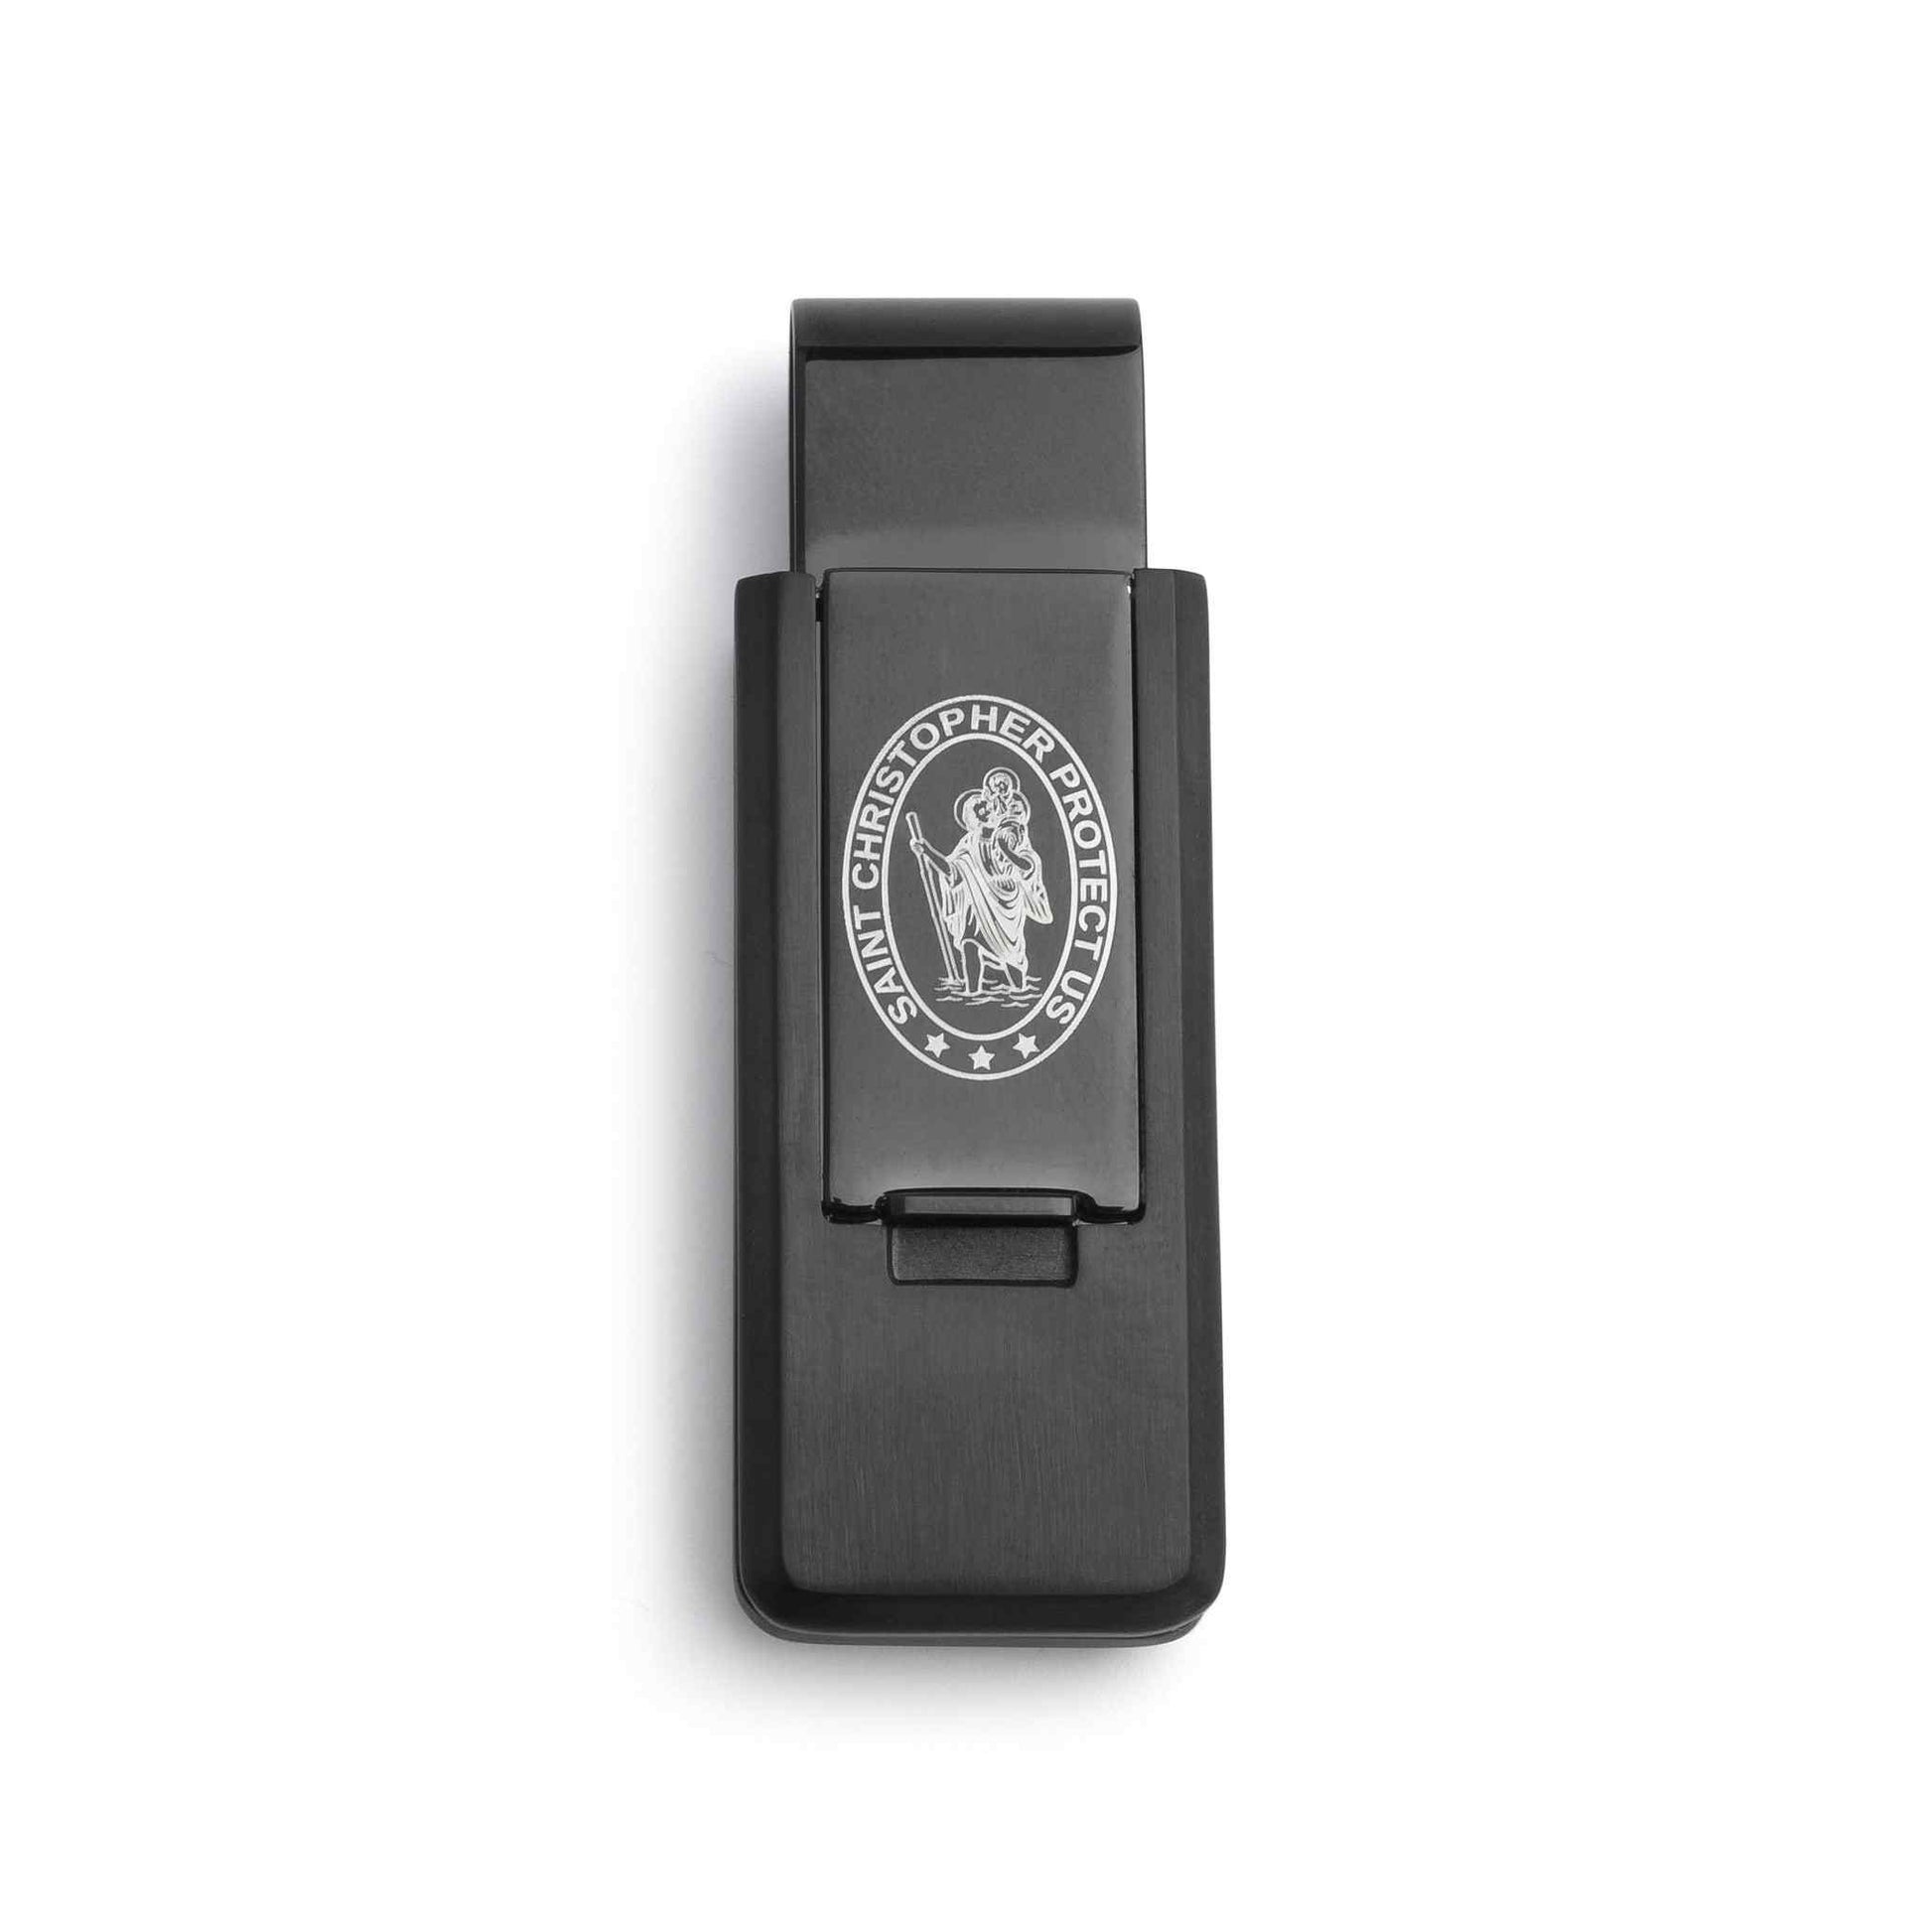 A religious symbol flip money clip displayed on a neutral white background.